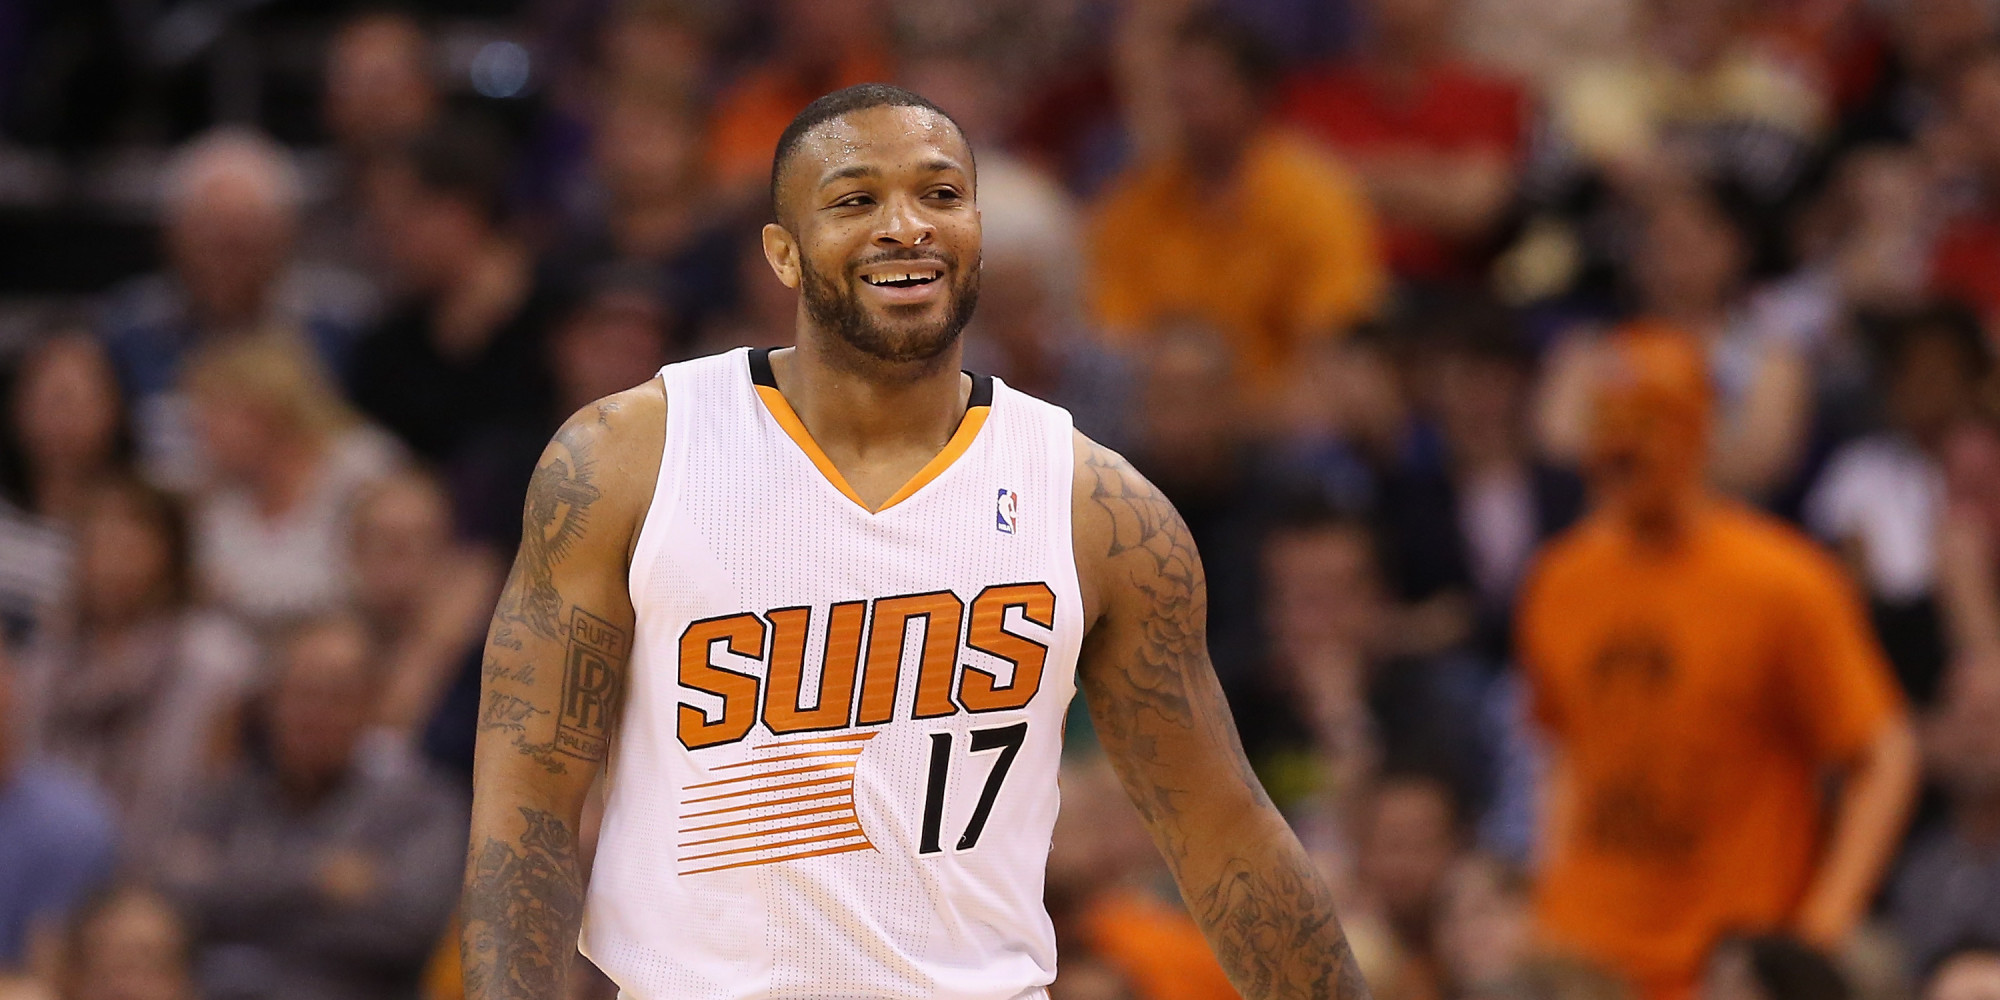 Phoenix Suns Player P.J. Tucker Charged With Super Extreme DUI | HuffPost